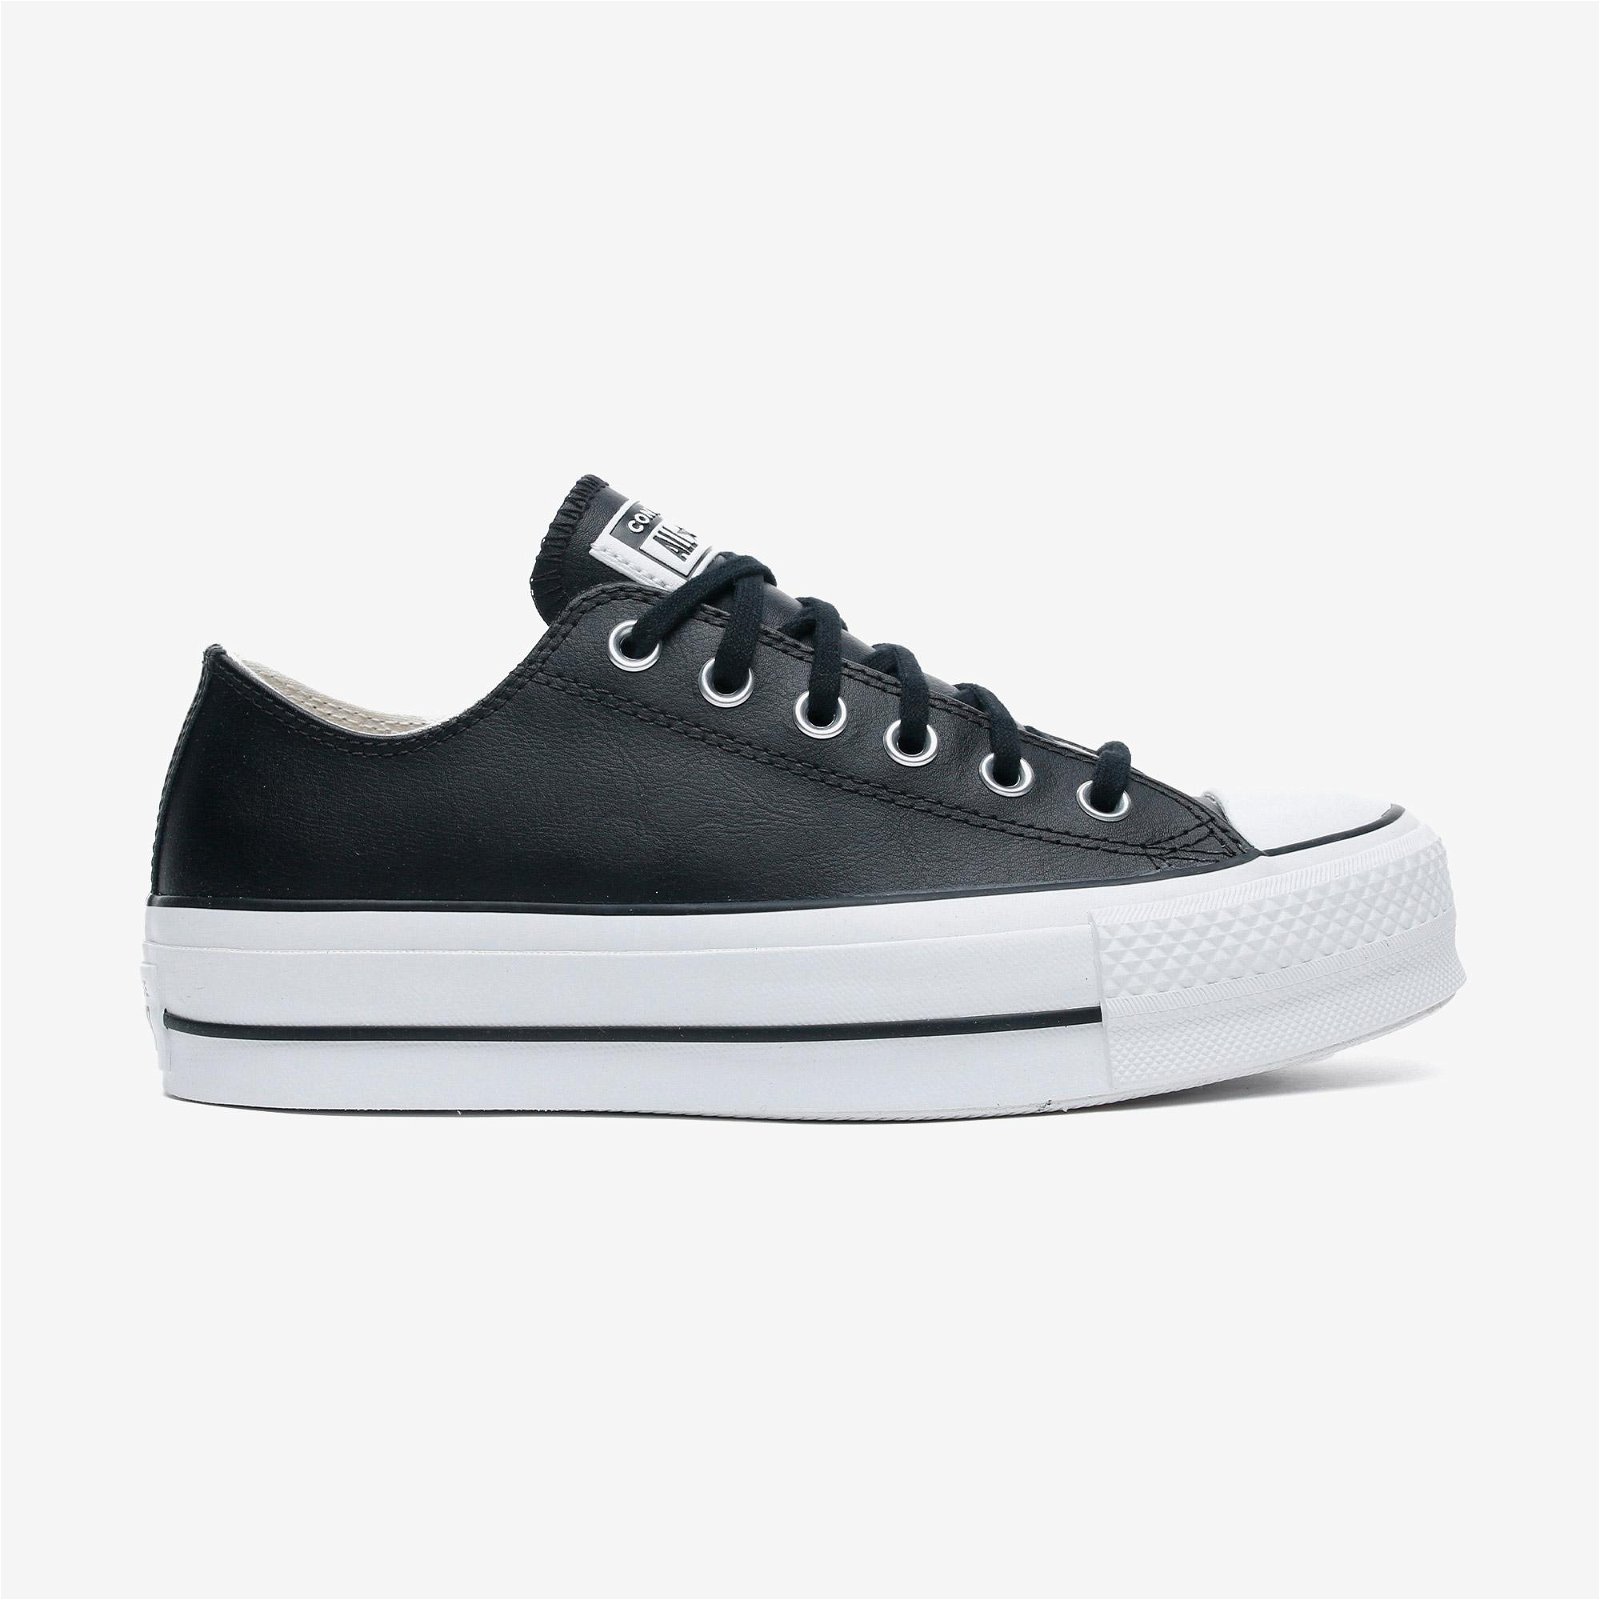  Converse Chuck Taylor All Star Lift Low Top Unisex Siyah Sneaker